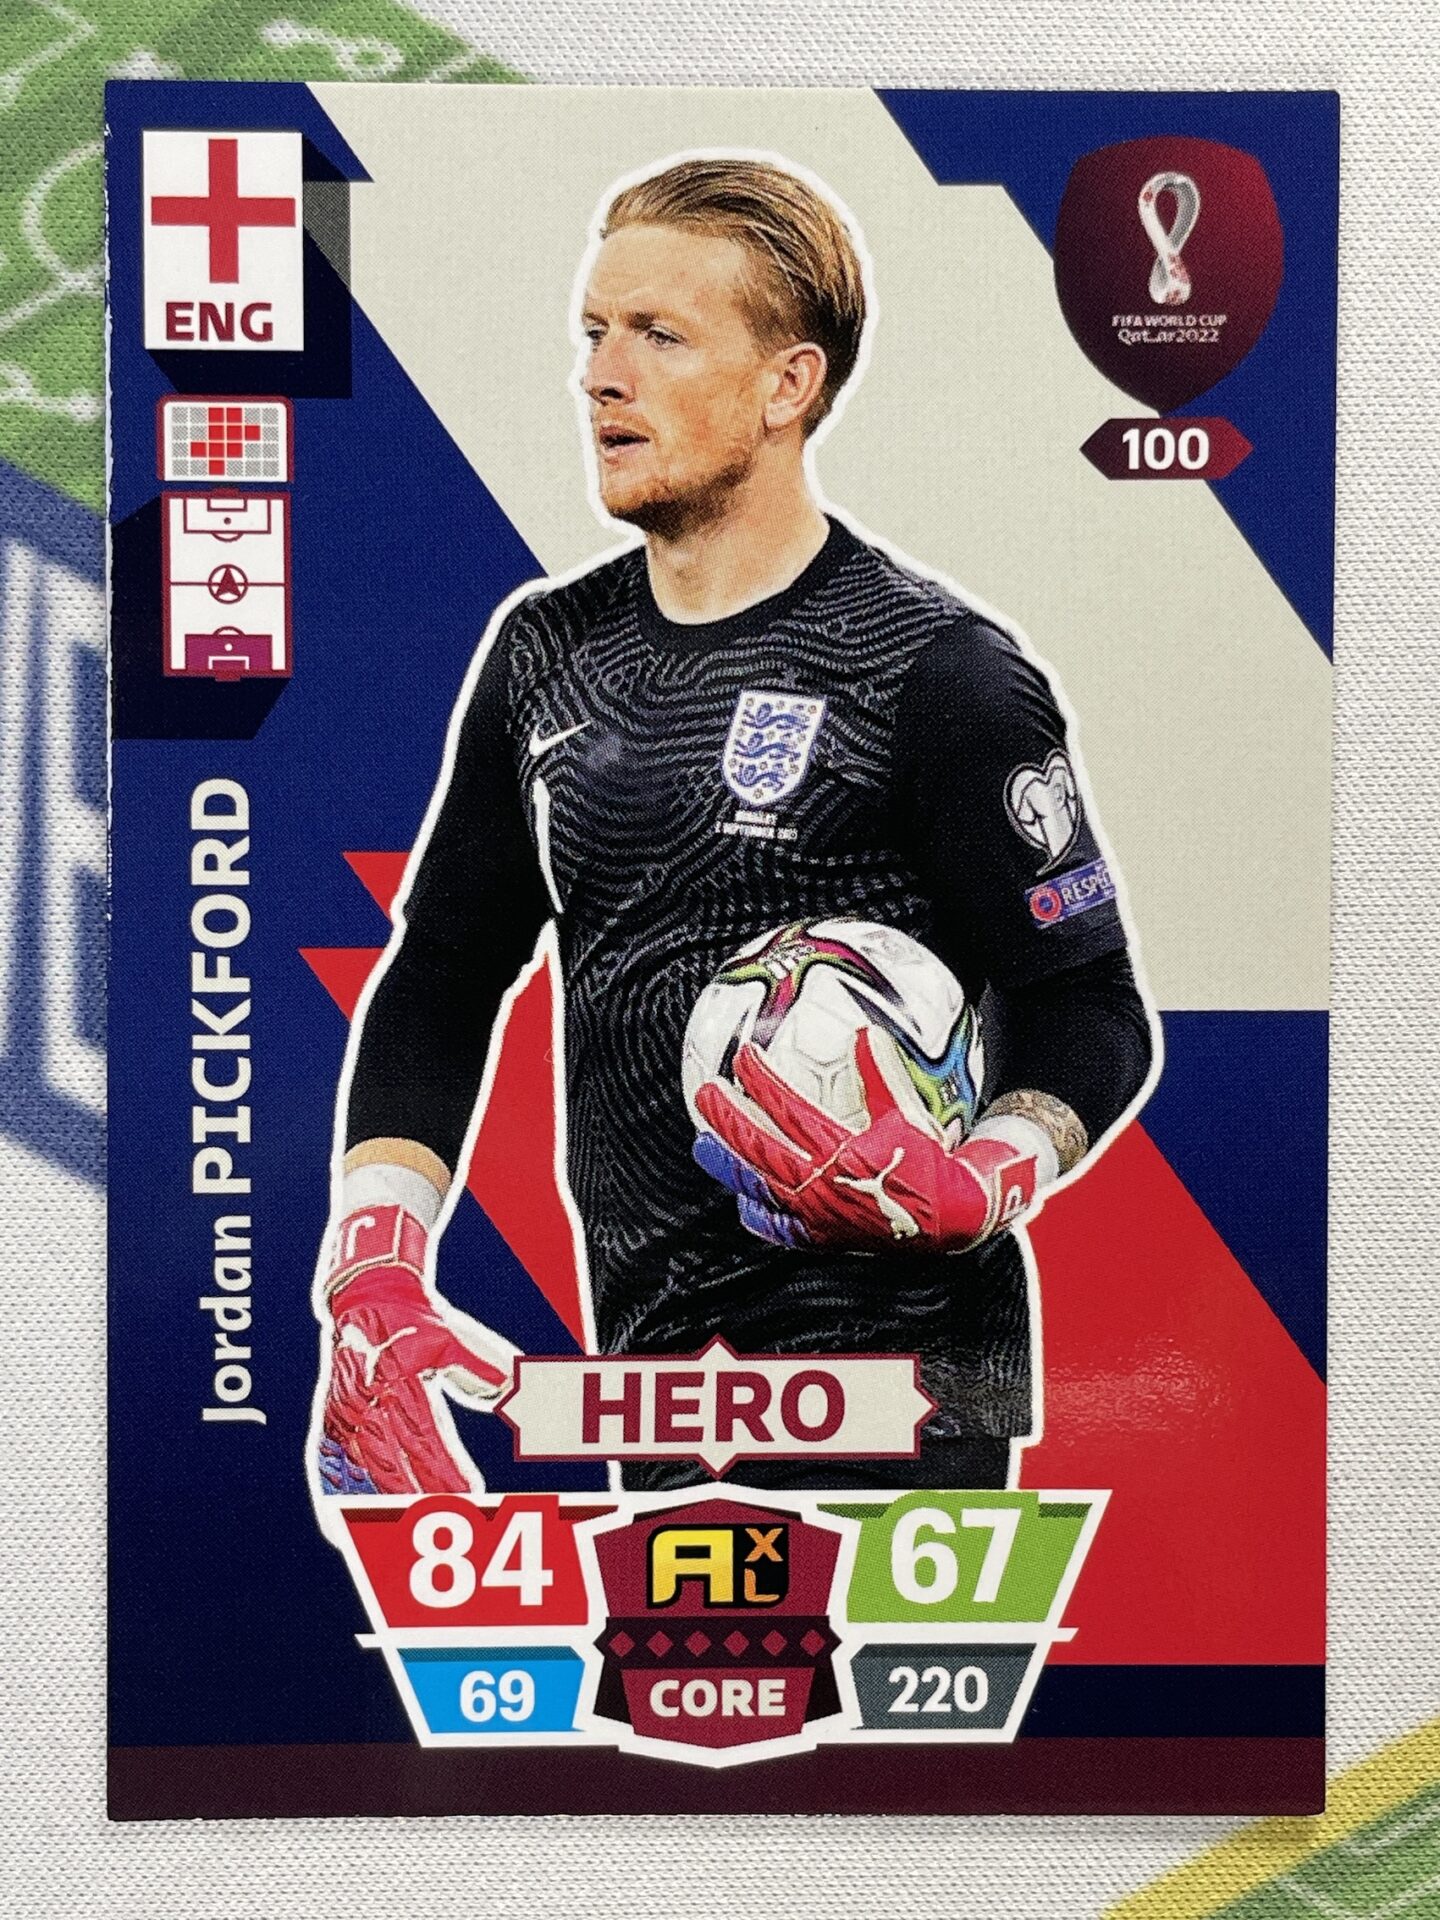 Panini UK & Ireland on X: Fancy another FREE digital packet? Click here to  play on the app and enter the code to redeem yours:   #GotGotNeed #WorldCup #AdrenalynXL  / X